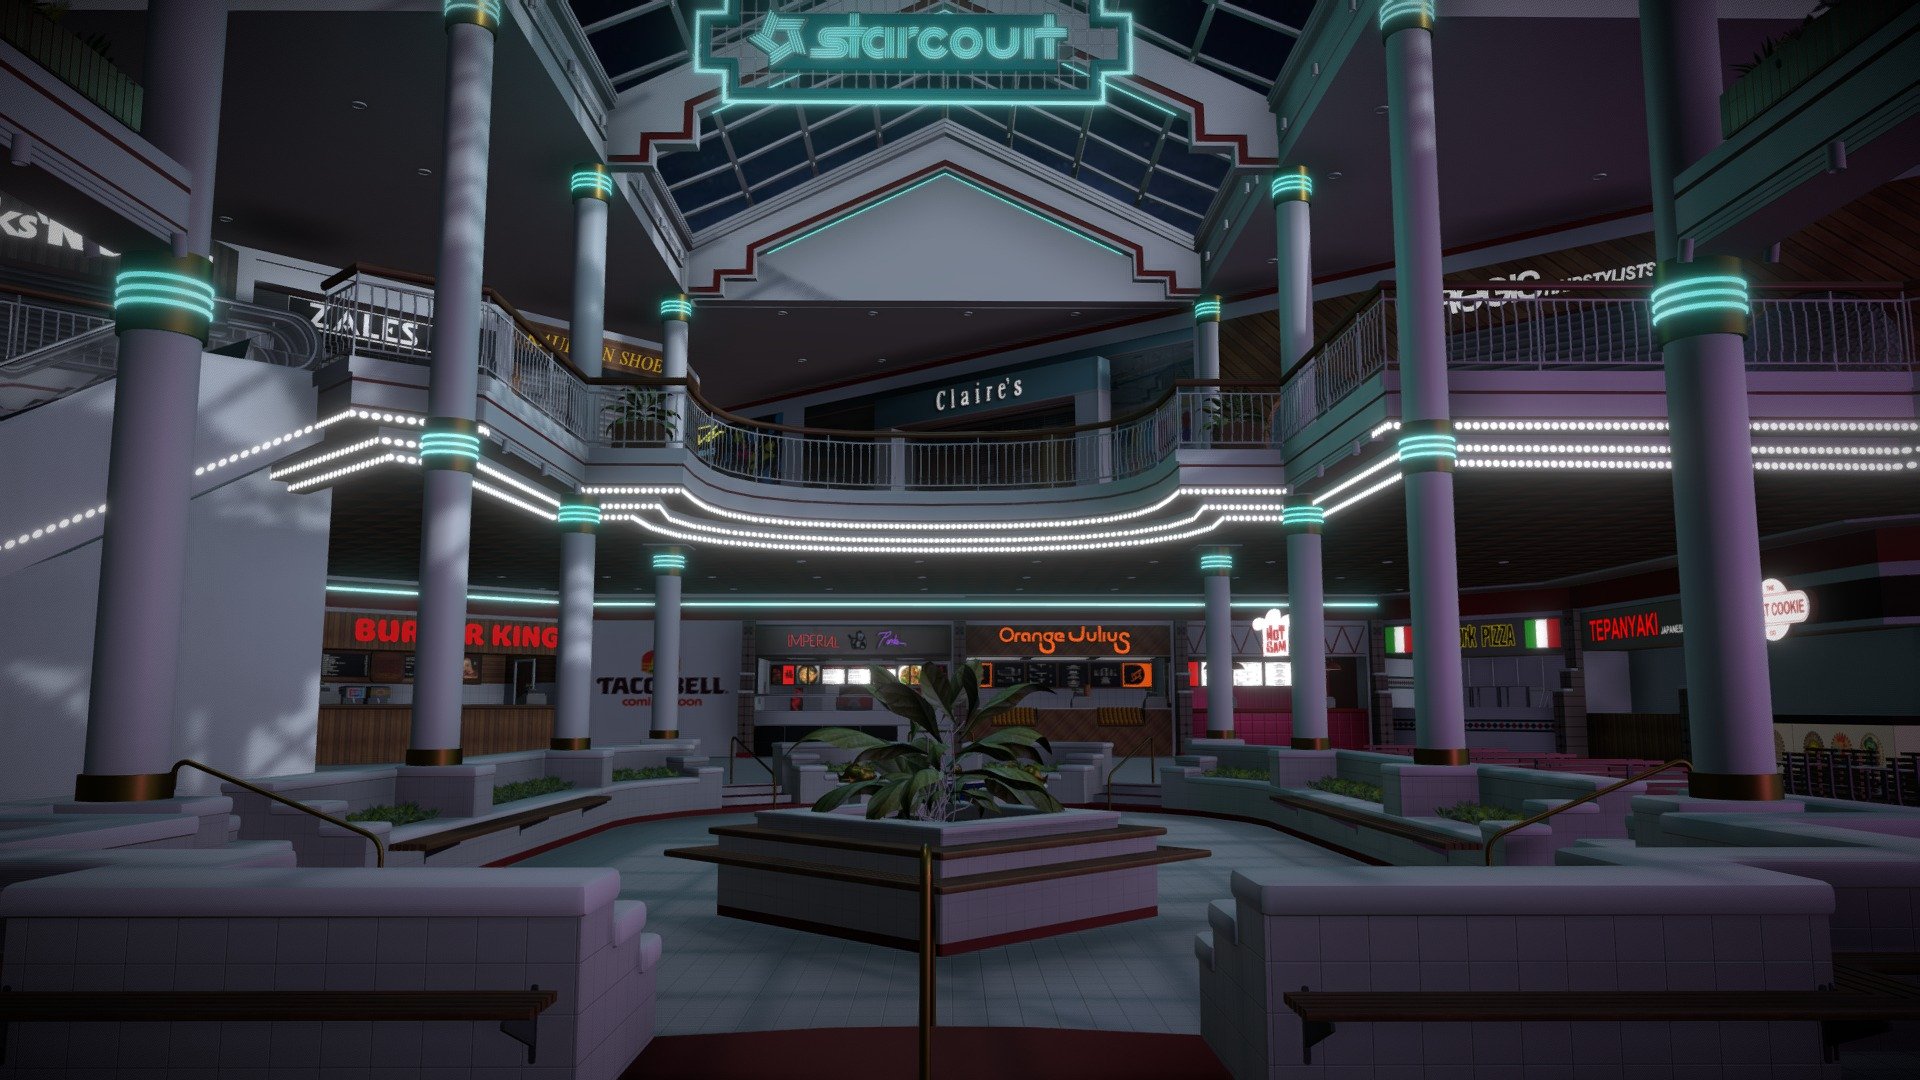 After the success of My Starcourt Mall exterior, I decided to take on an even bigger challenge and model the Mall interior. I focused on the food court and shops featured in the show only. It was a fun project and it took about a week to put together but as it's an ongoing project, more details will be added when I find the time between contracts. 

Shops featured are&hellip;
The Gap, Sam Goody, Waldenbooks, Claire's, Zales, Kaufman Shoes, Jazzercise, Wicks &lsquo;N' Sticks, Regis Hairstylists, Lovelace Lingerie, SHAPES Activewear Outlet, The Game Player, Starcourt Cinemas, Time-Out Arcade, Flash Studio, Food Court, Scoops Ahoy, Hot Dog on a Stick, The Great Cookie, Teppanyaki, New York Pizza, Orange Julius, Burger King, Hawkins’ Heroes, Hot Sam Pretzels, Imperial Panda,Taco Bell

Huge thanks to all those who helped by providing photos, videos and Blueprints, without those I couldn't have made it at all :)

This model is not for sale or downloadable. Any abusive comments will be reported&hellip;You have been warned! - Starcourt Mall Interior (Stranger Things) - 3D model by paulelderdesign 3d model